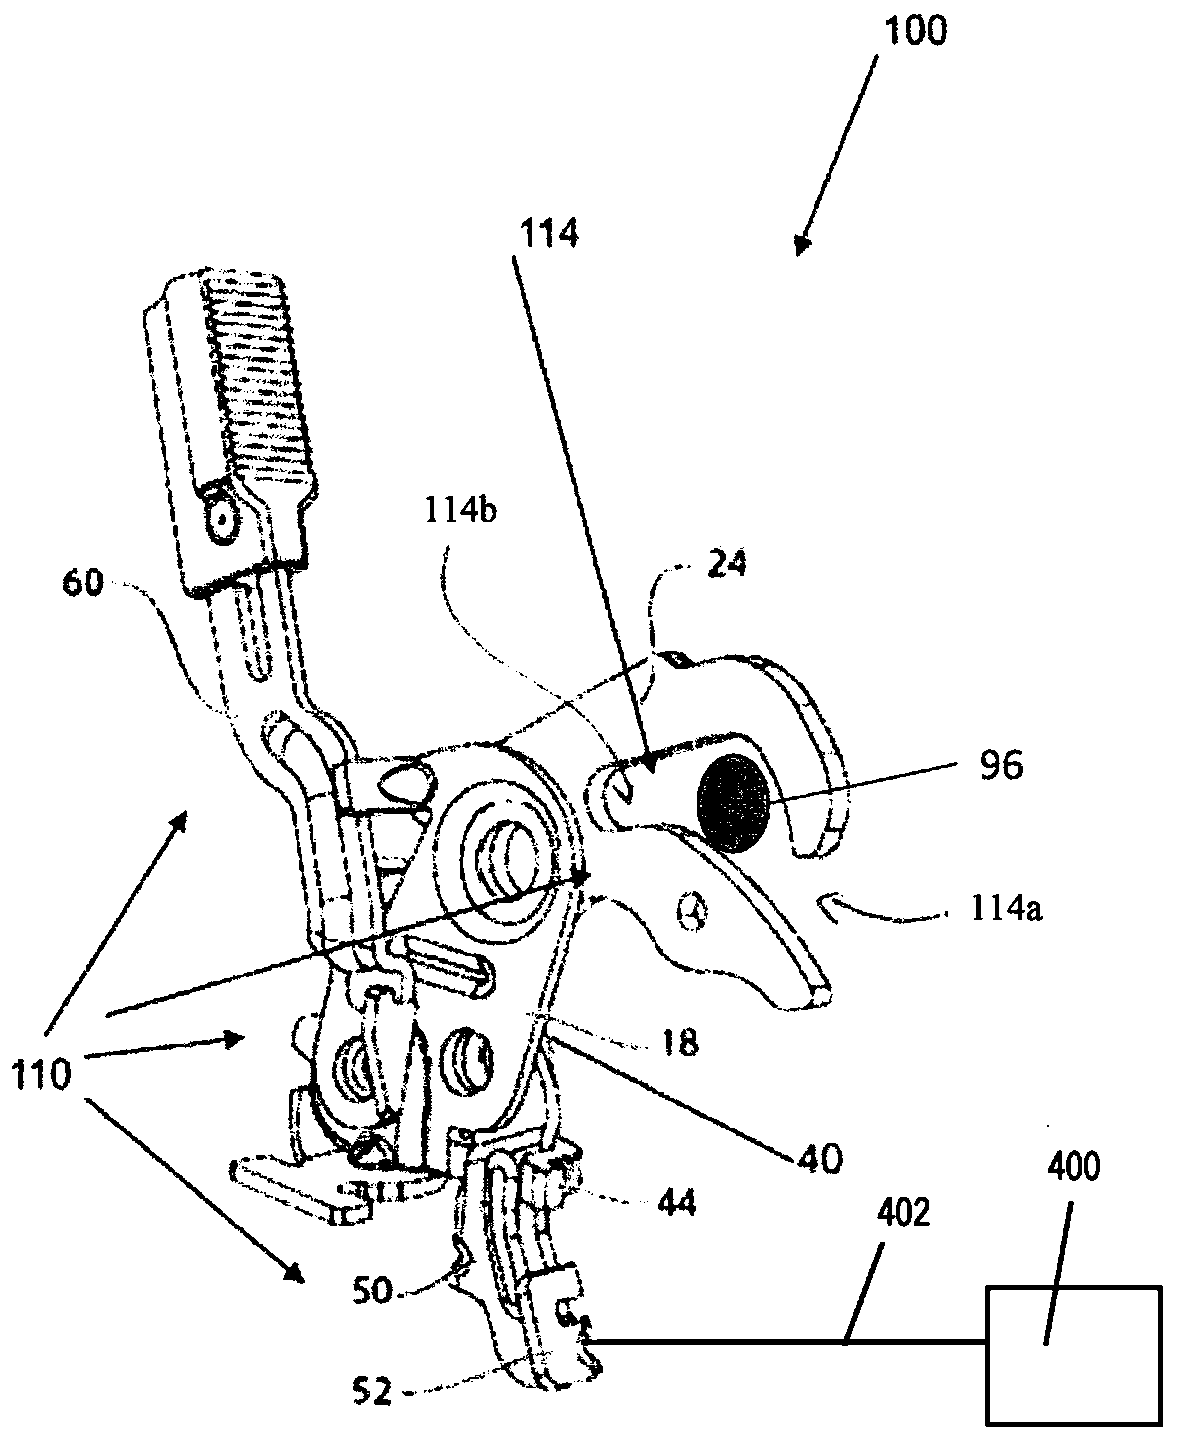 Relative displacement mechanism for active pedestrian safety latch